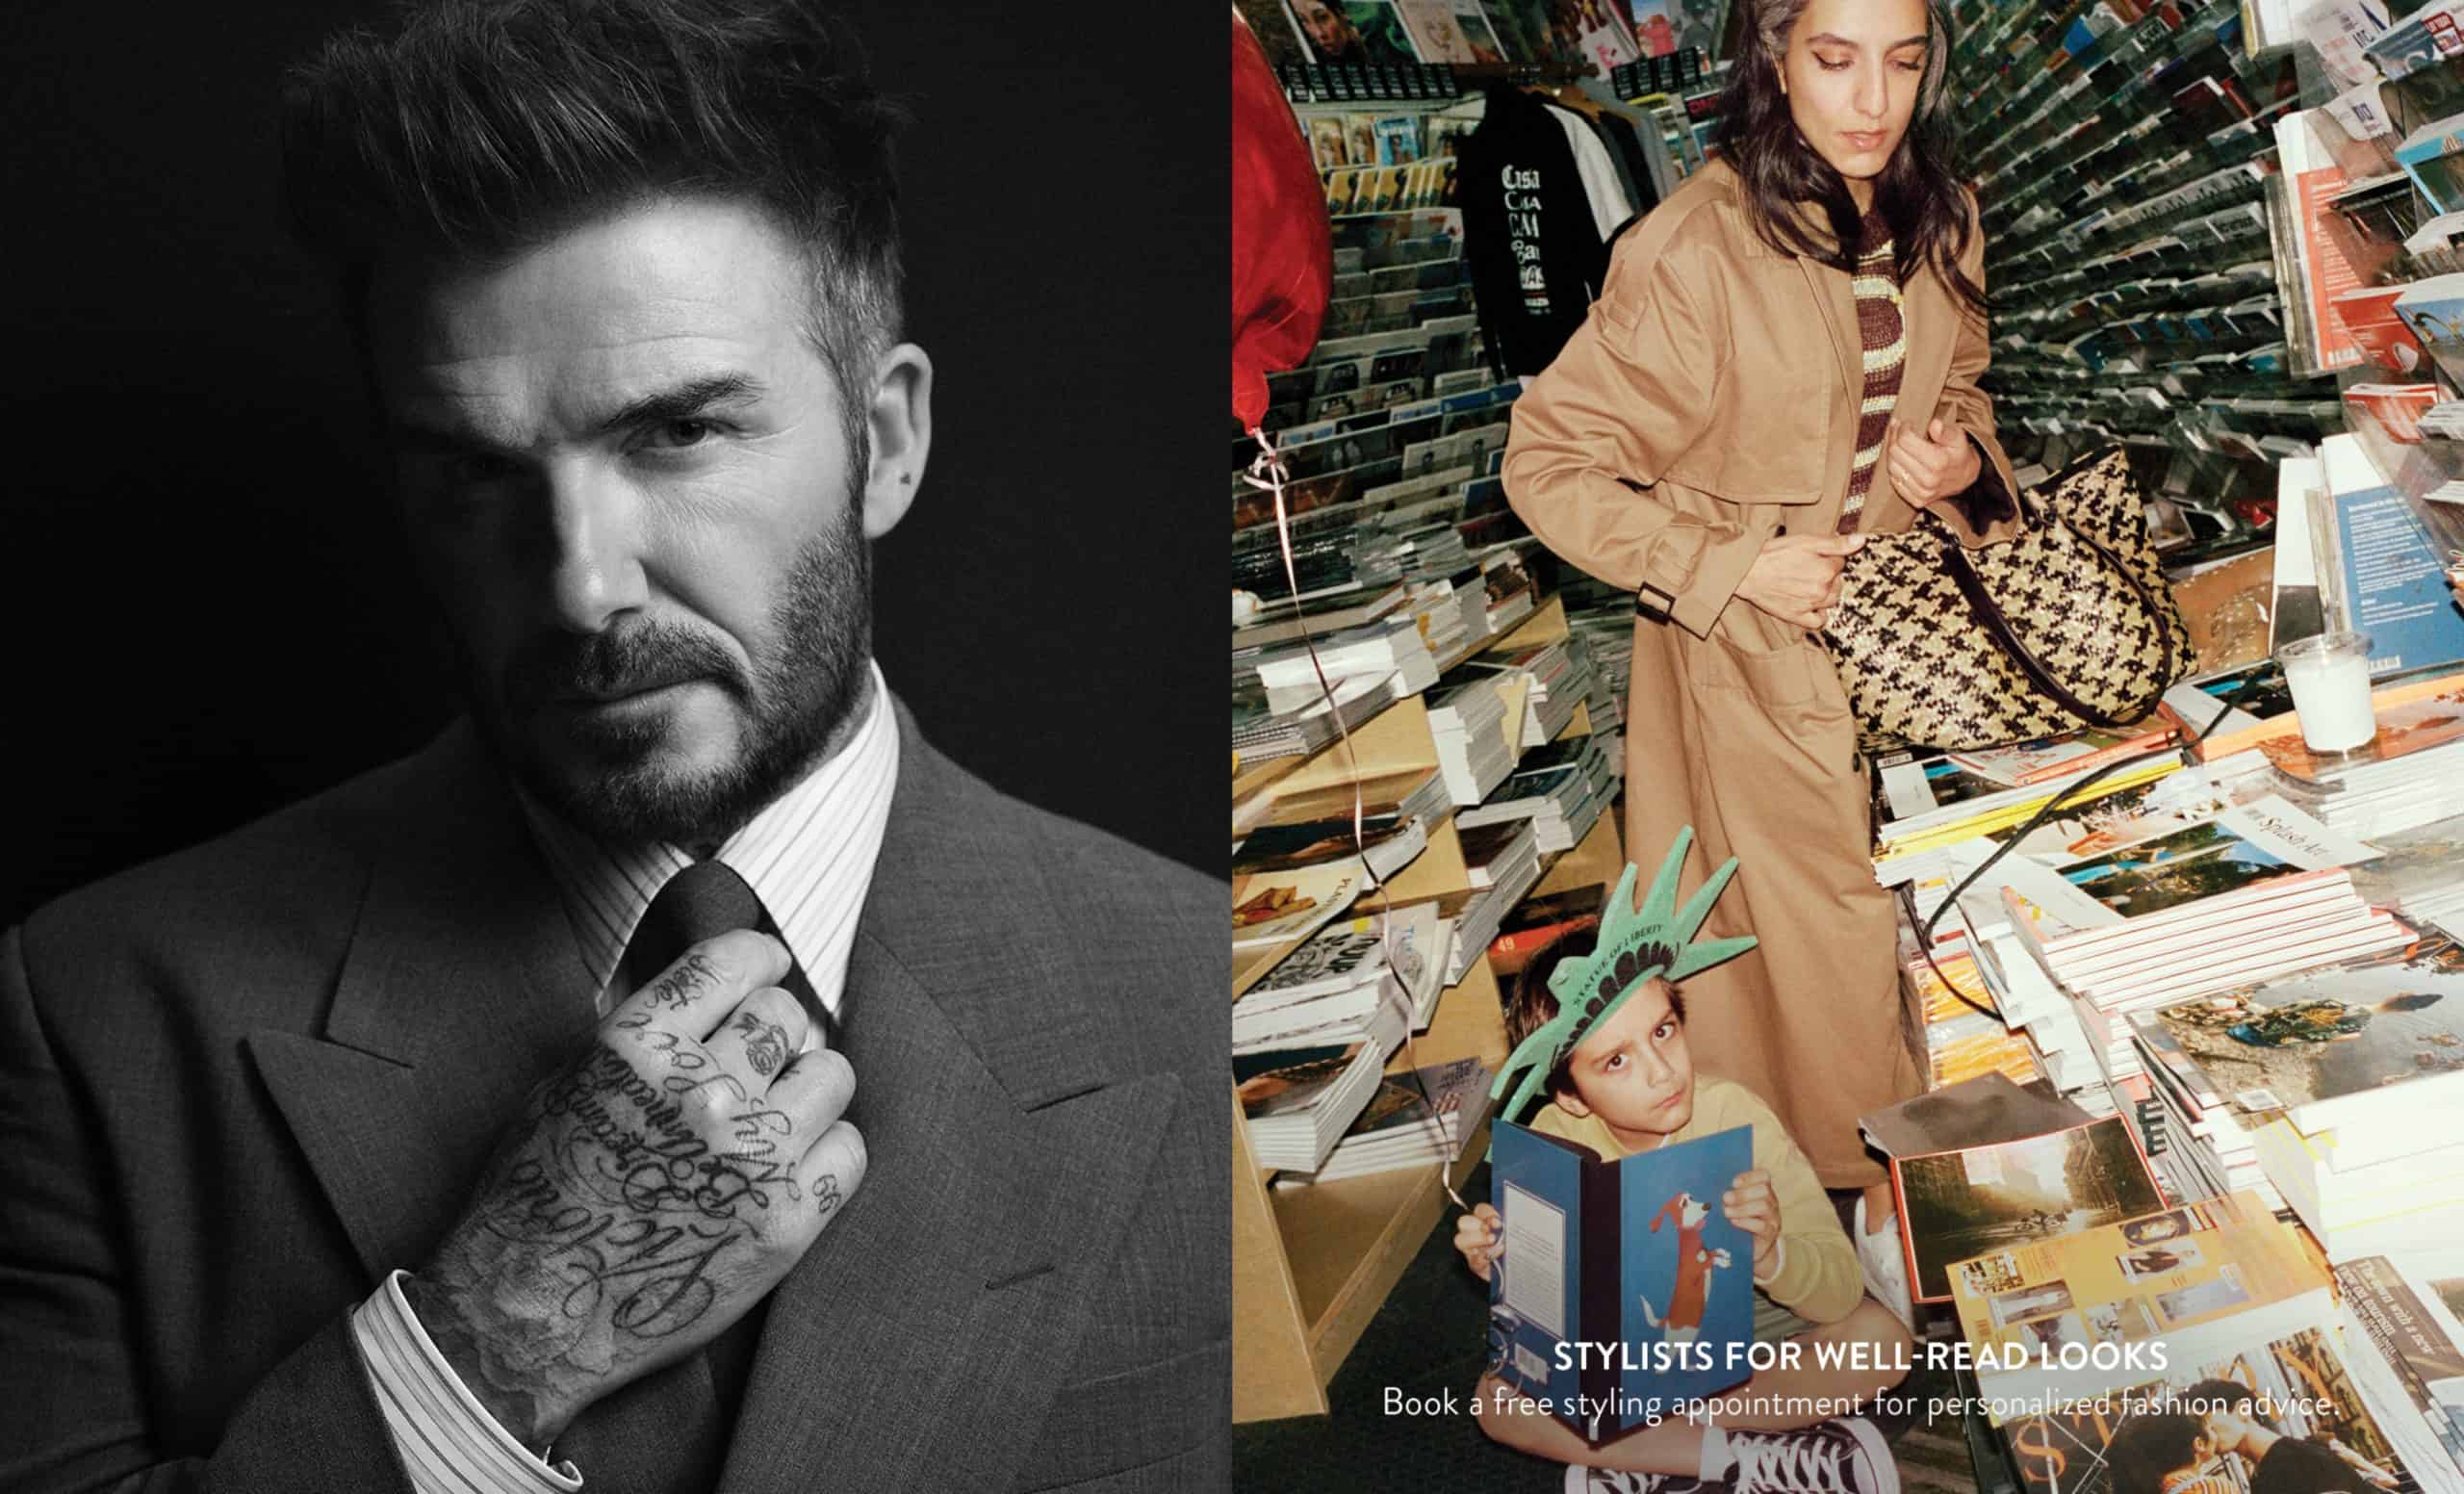 Burberry’s Sales Woes, Nordstrom Hearts NYC, David Beckham x Hugo Boss, & More!